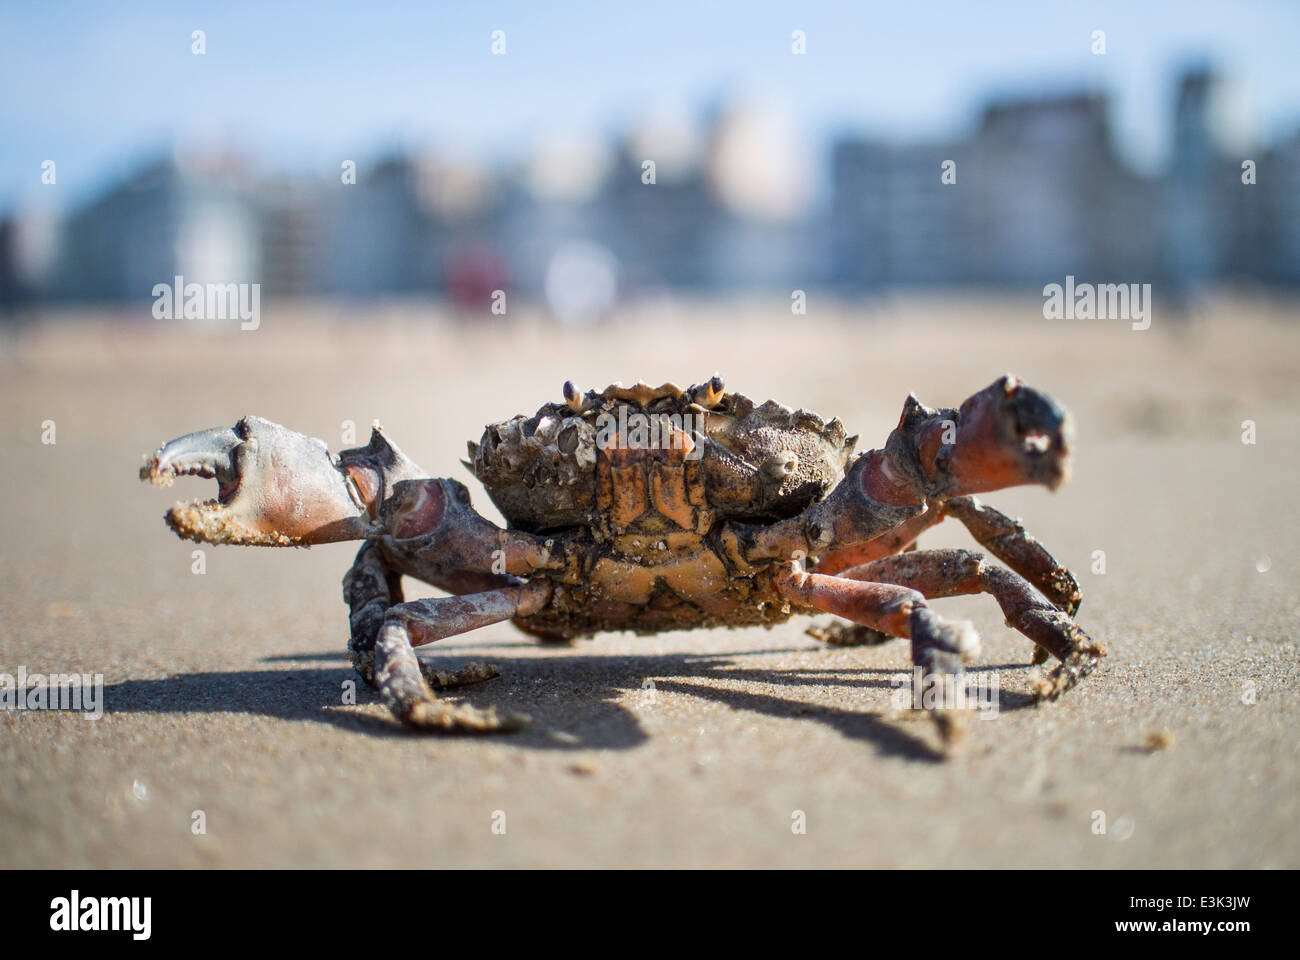 a crab on the beach Stock Photo